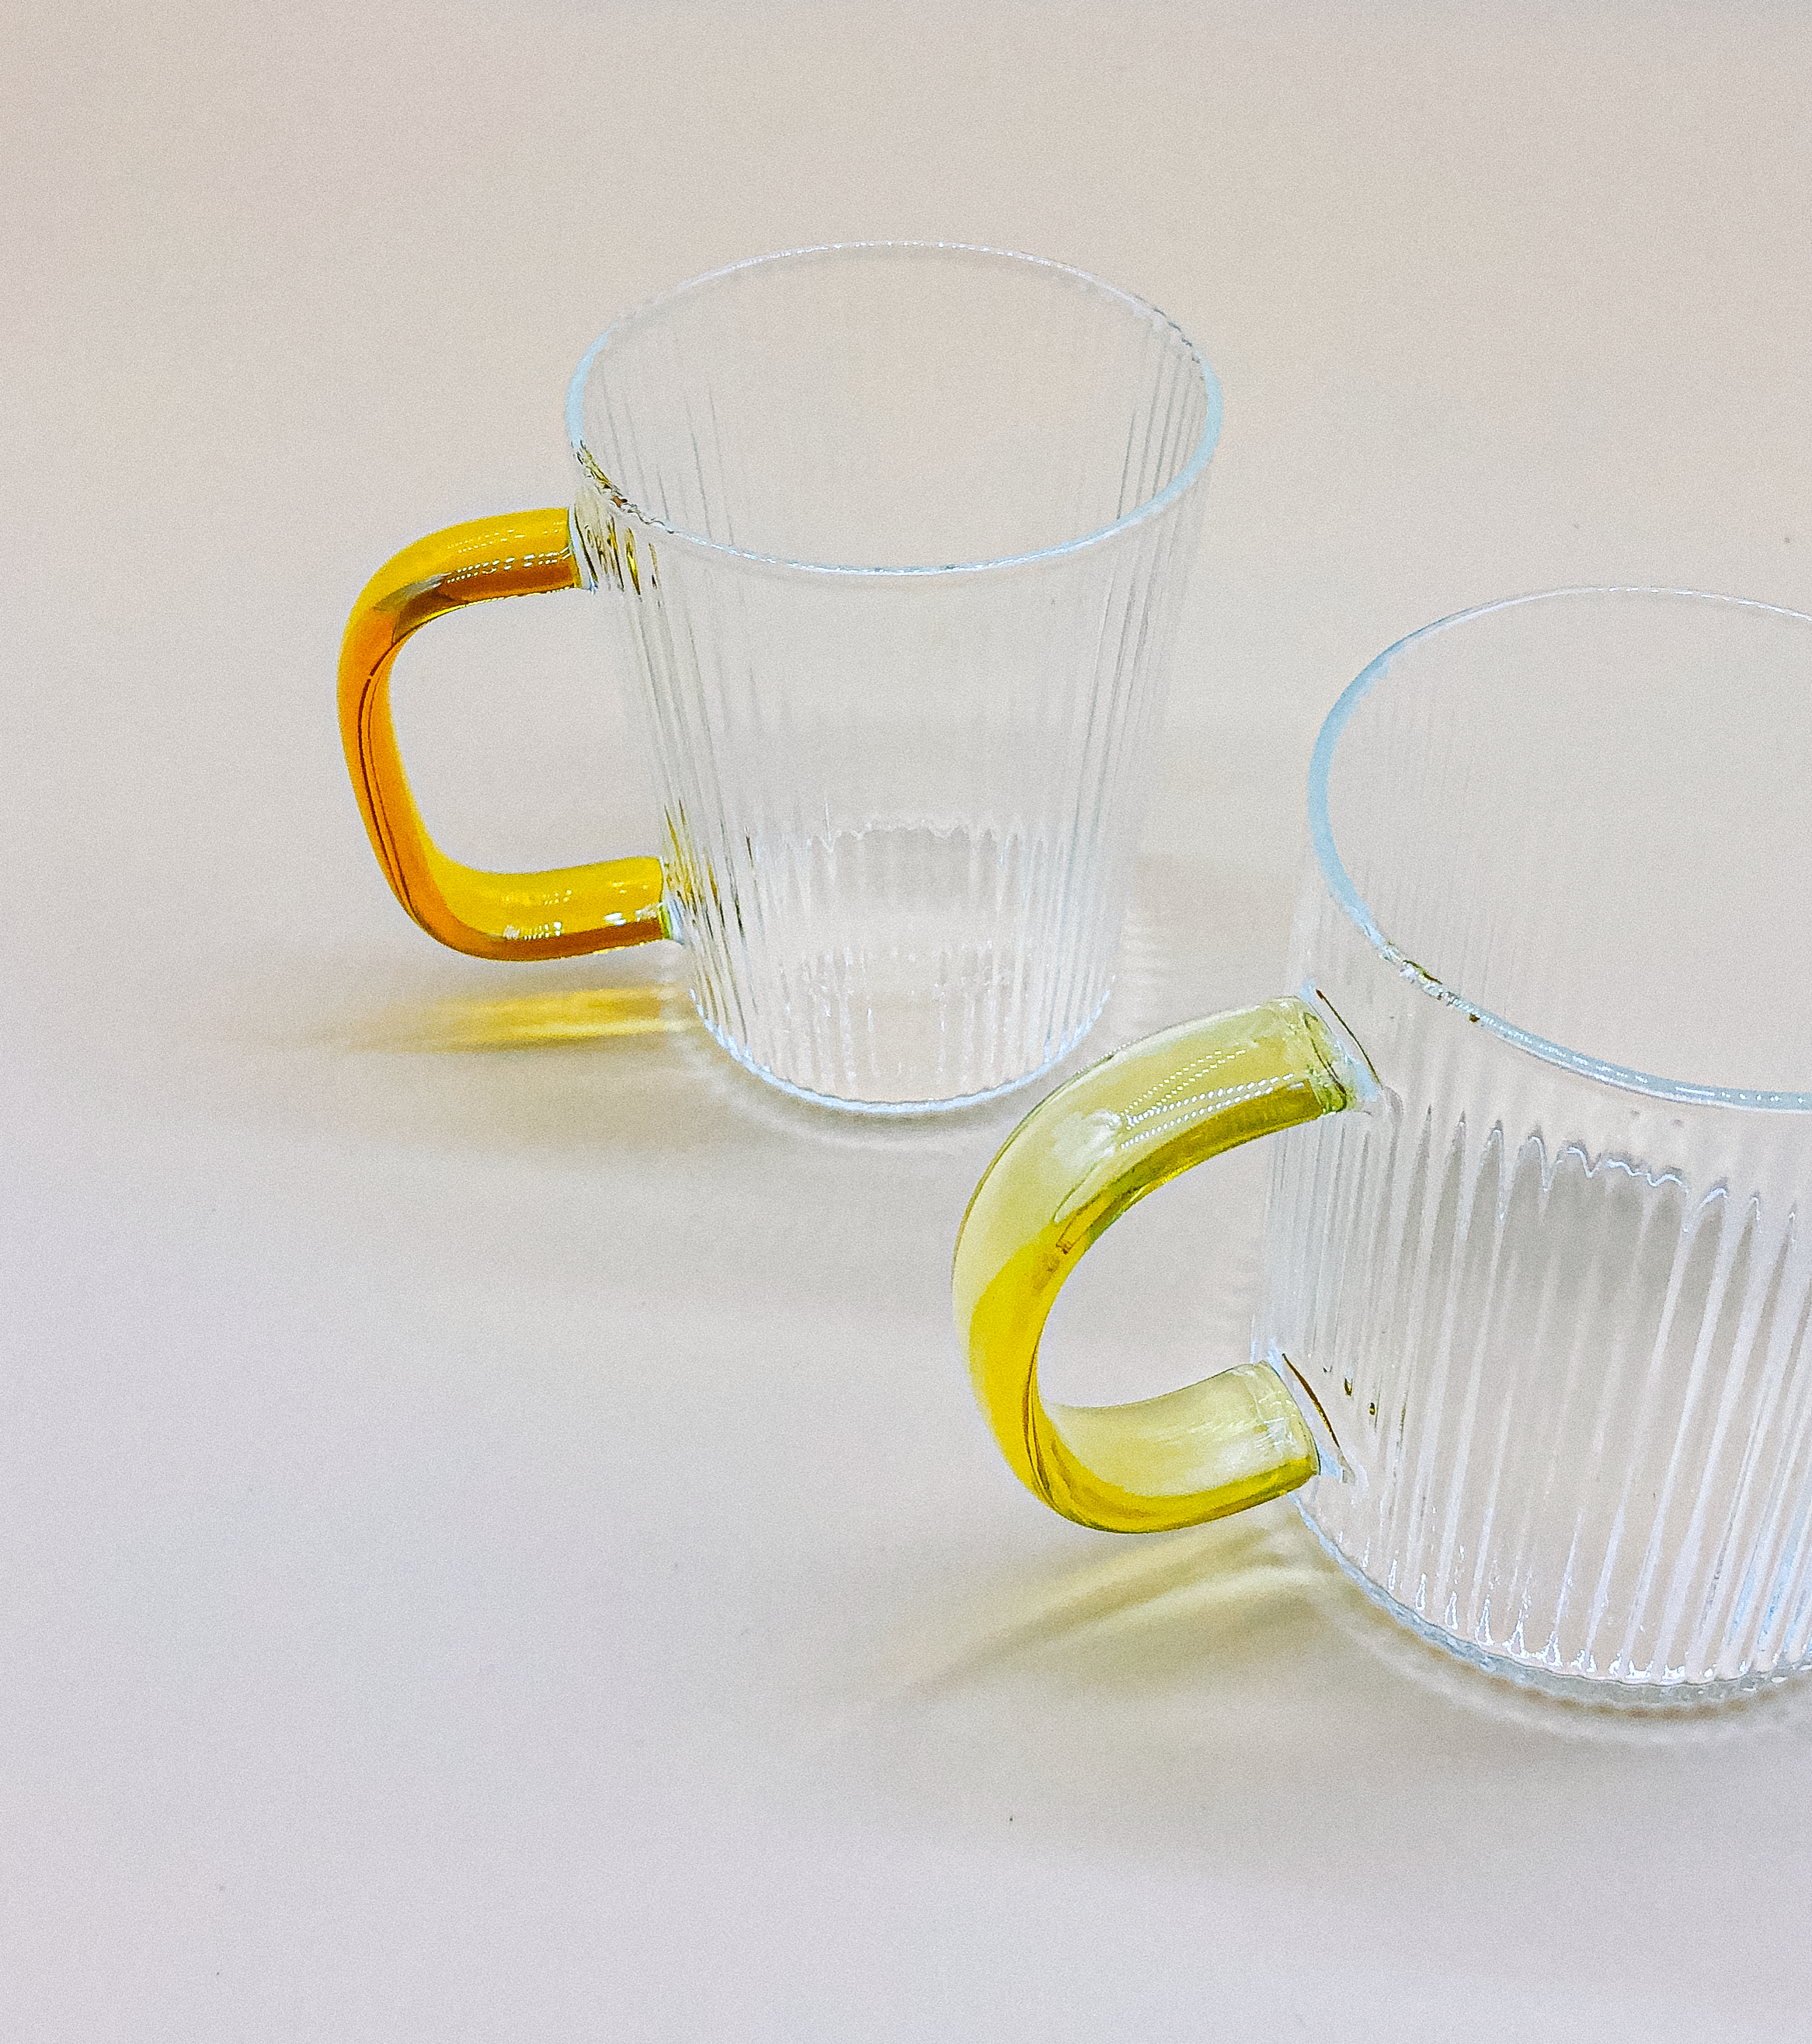 Ripple Accent Mug (Yellow) by PROSE Tabletop